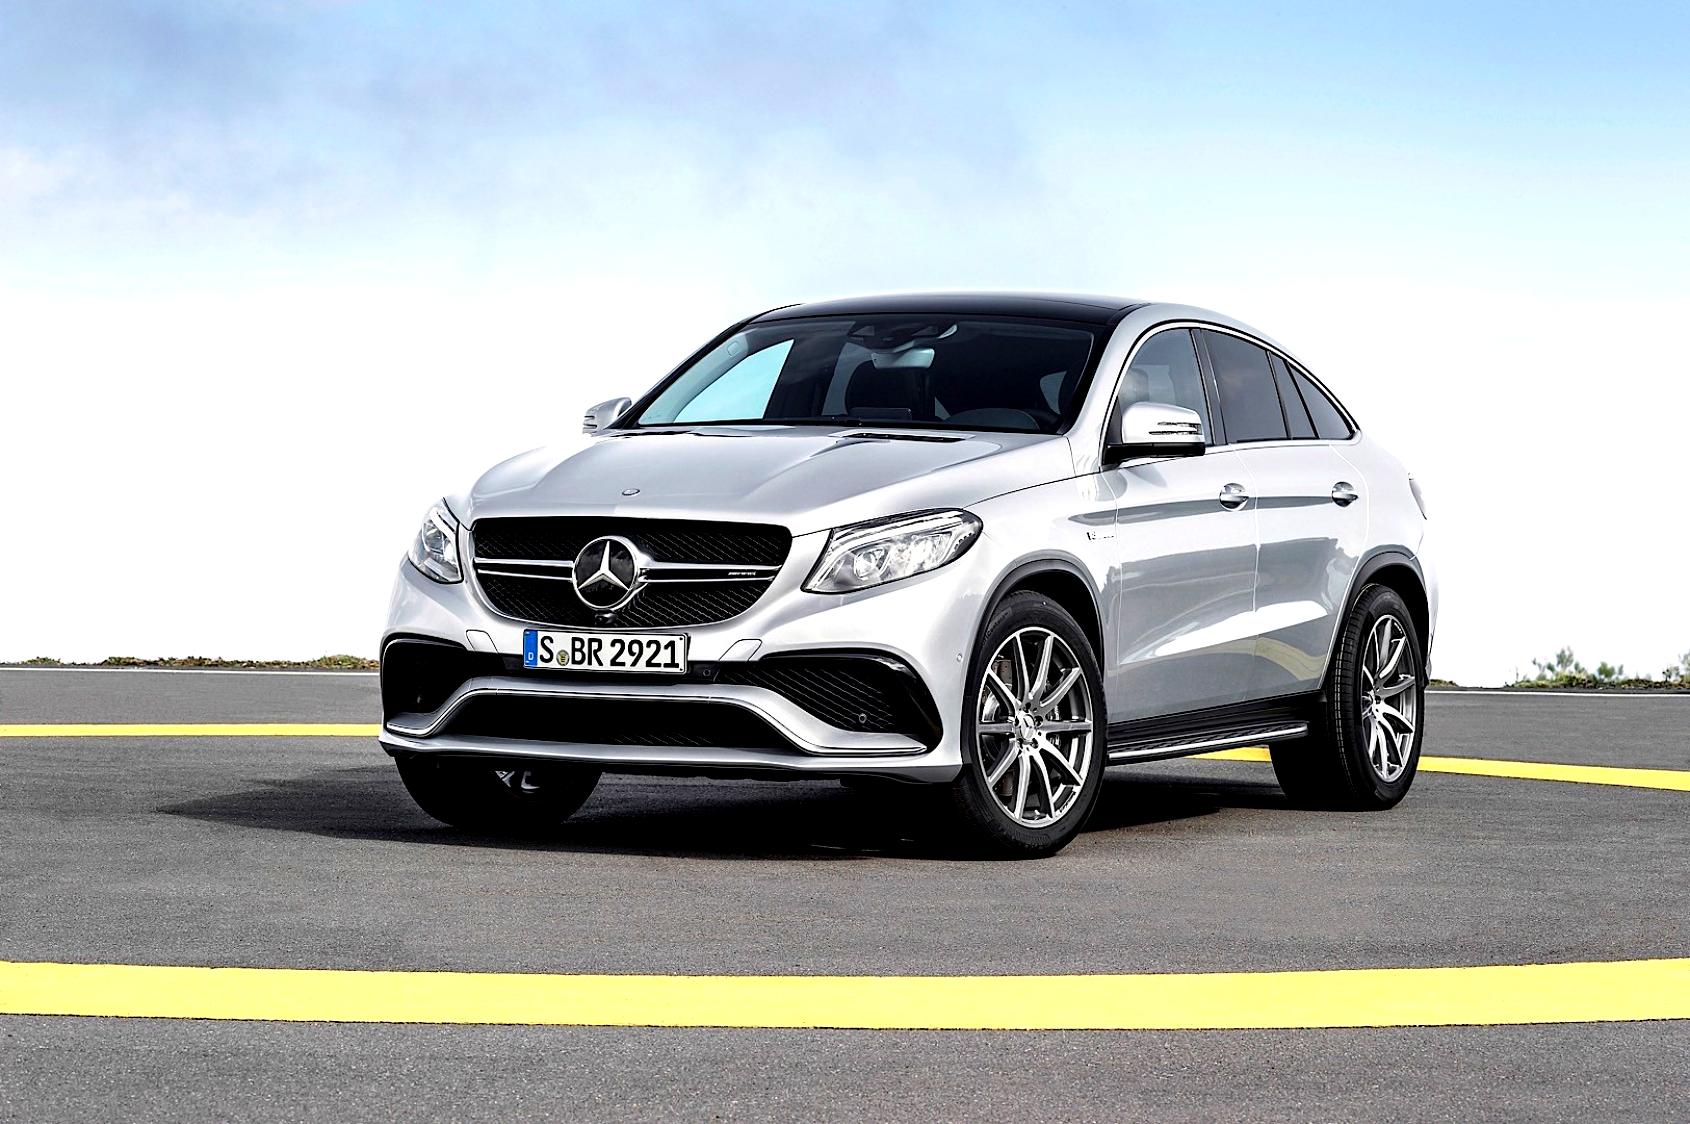 Mercedes Benz GLE Coupe AMG 2015 #20